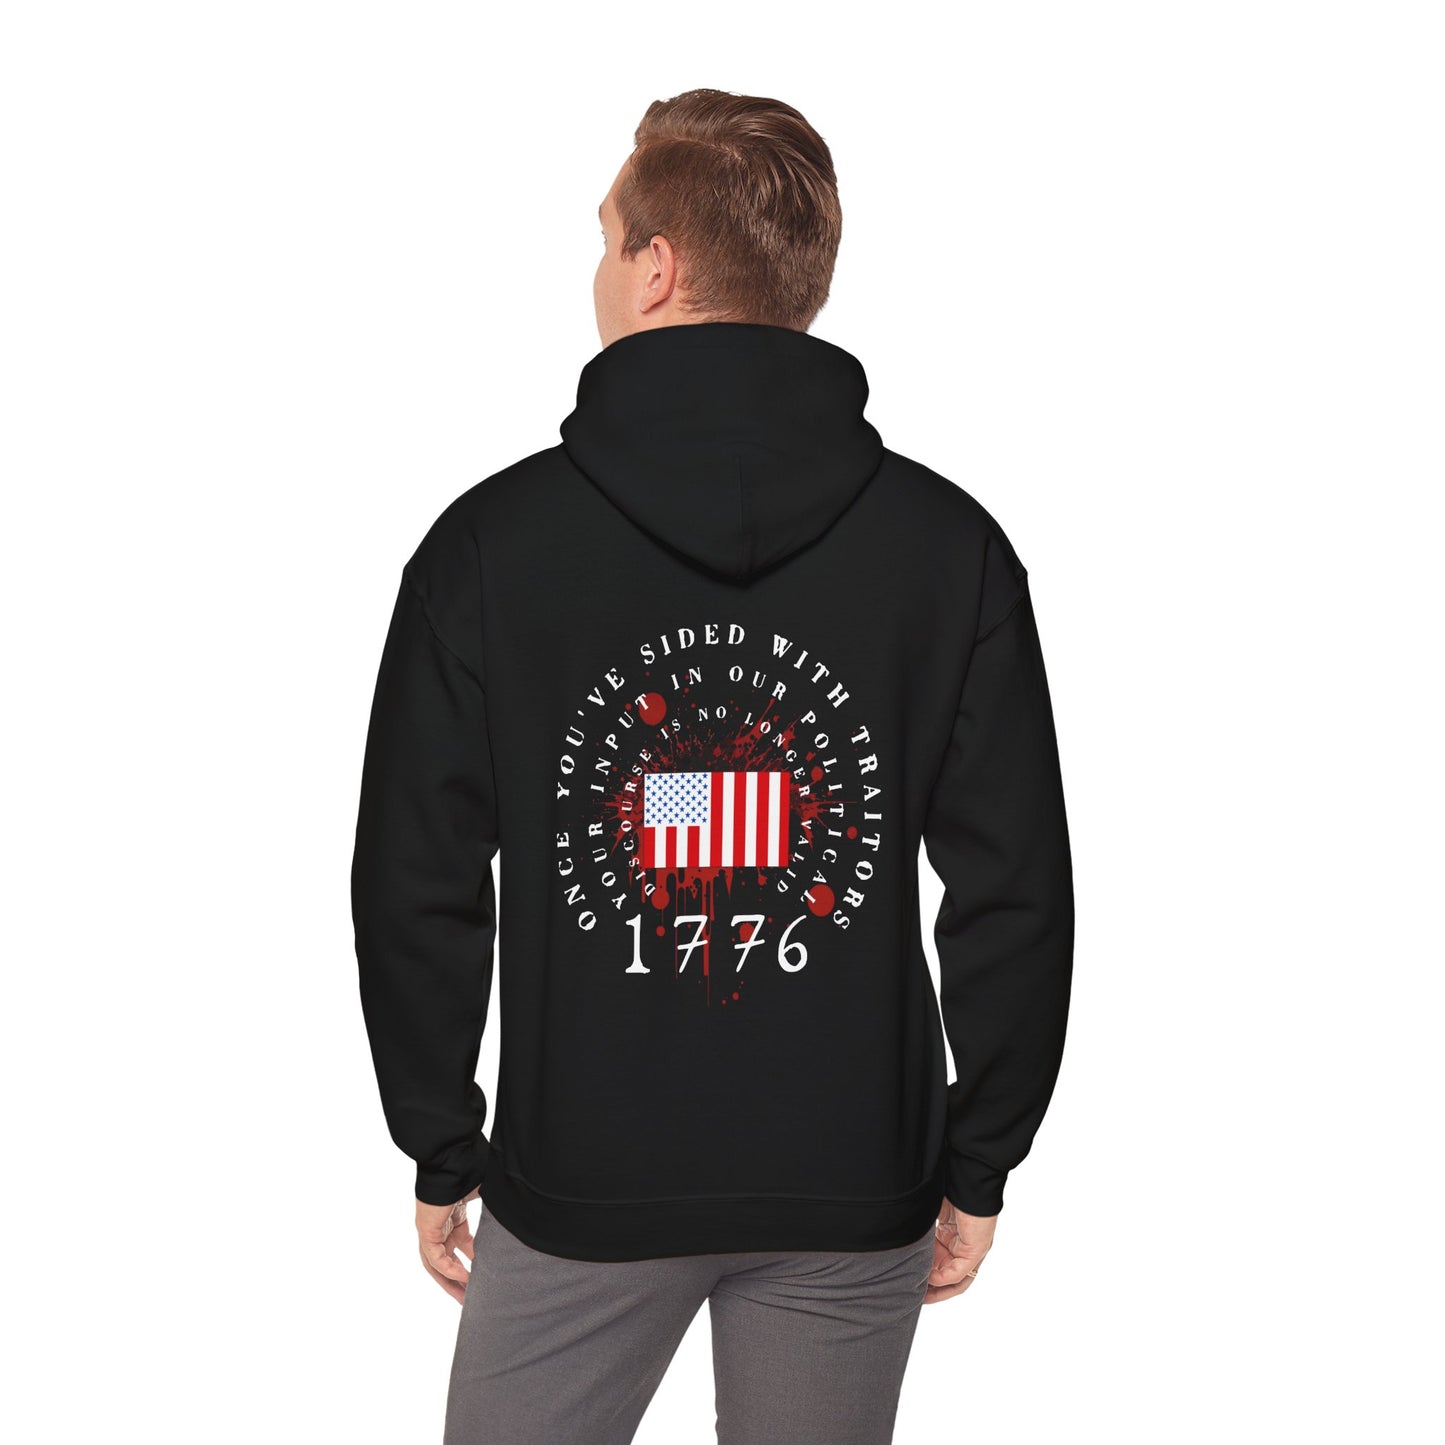 Once You've Sided With Traitors - Flag Hoodie